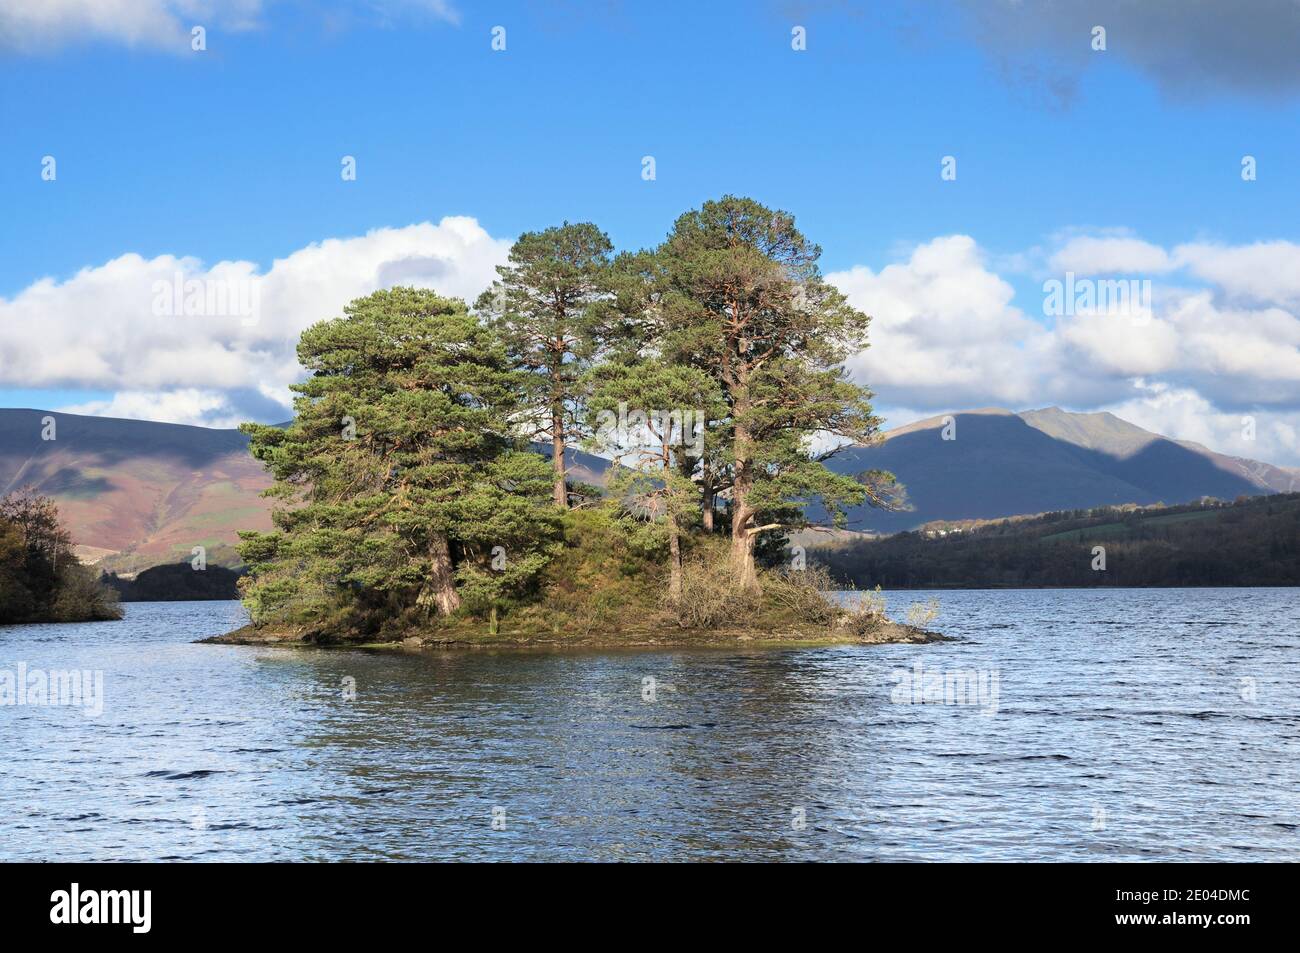 Otter Island in Abbot's Bay, Derwentwater, Lake District National Park, England, UK Stock Photo